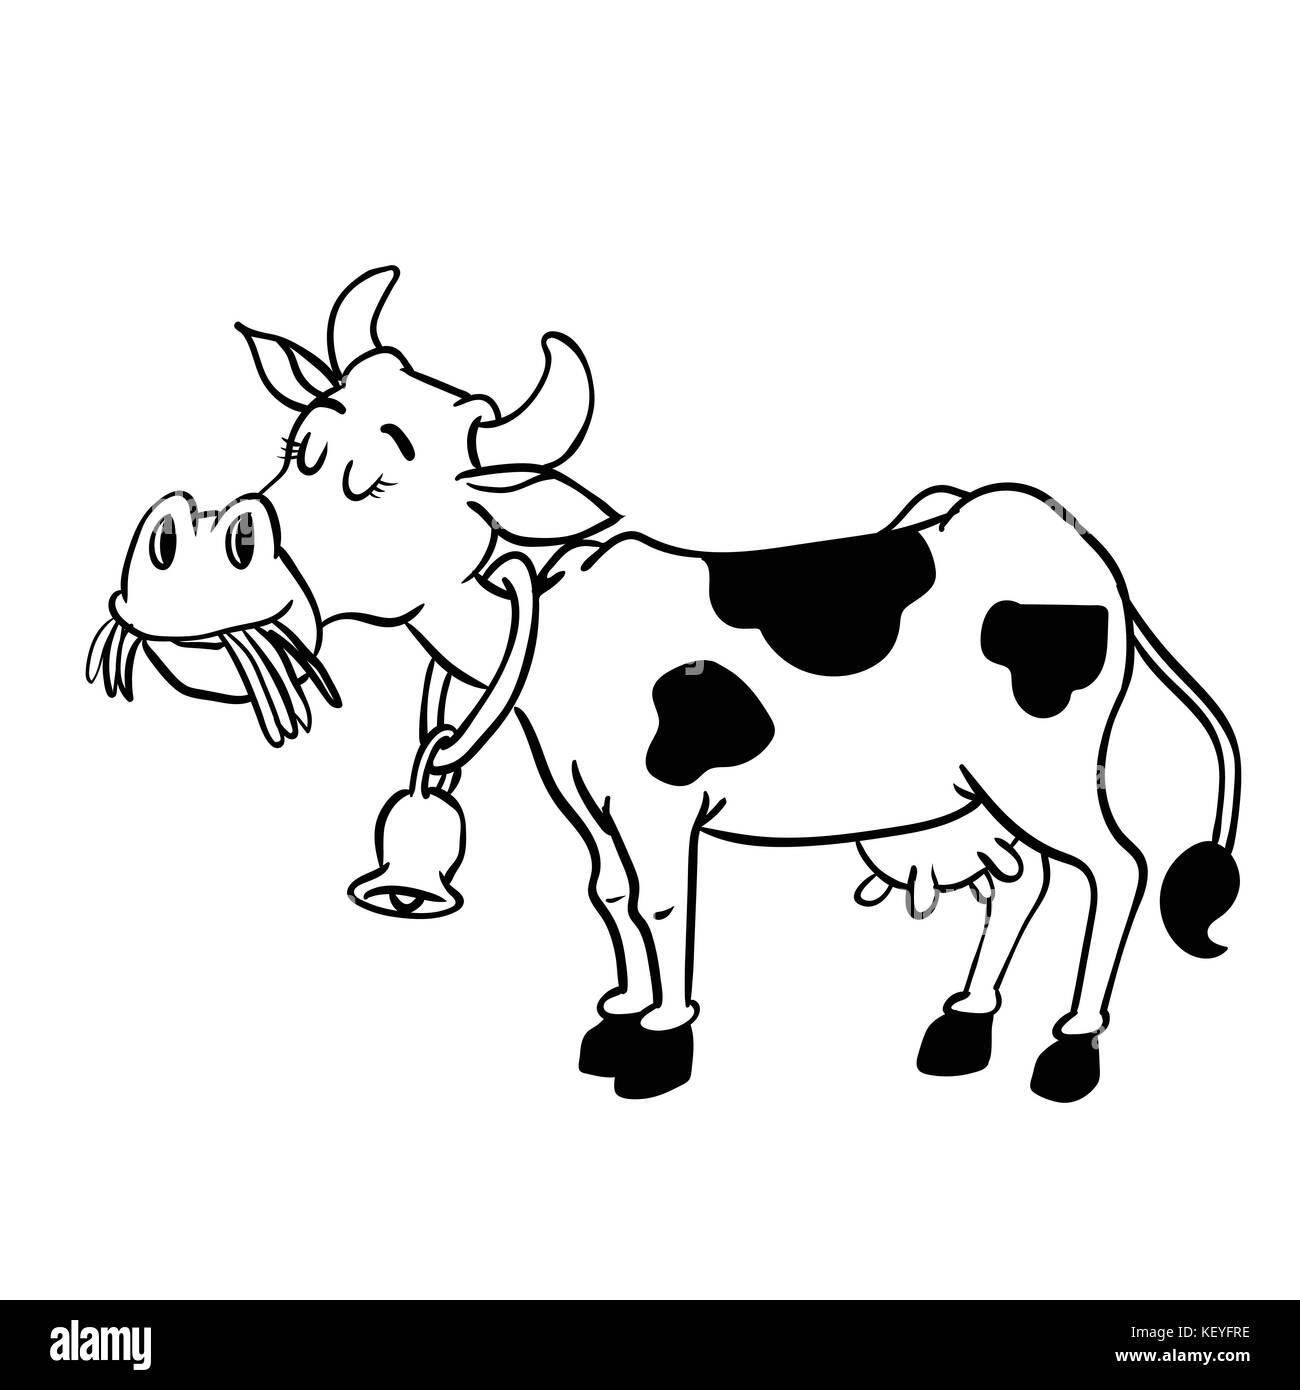 How to Draw a Cow Face - Easy Drawing Art